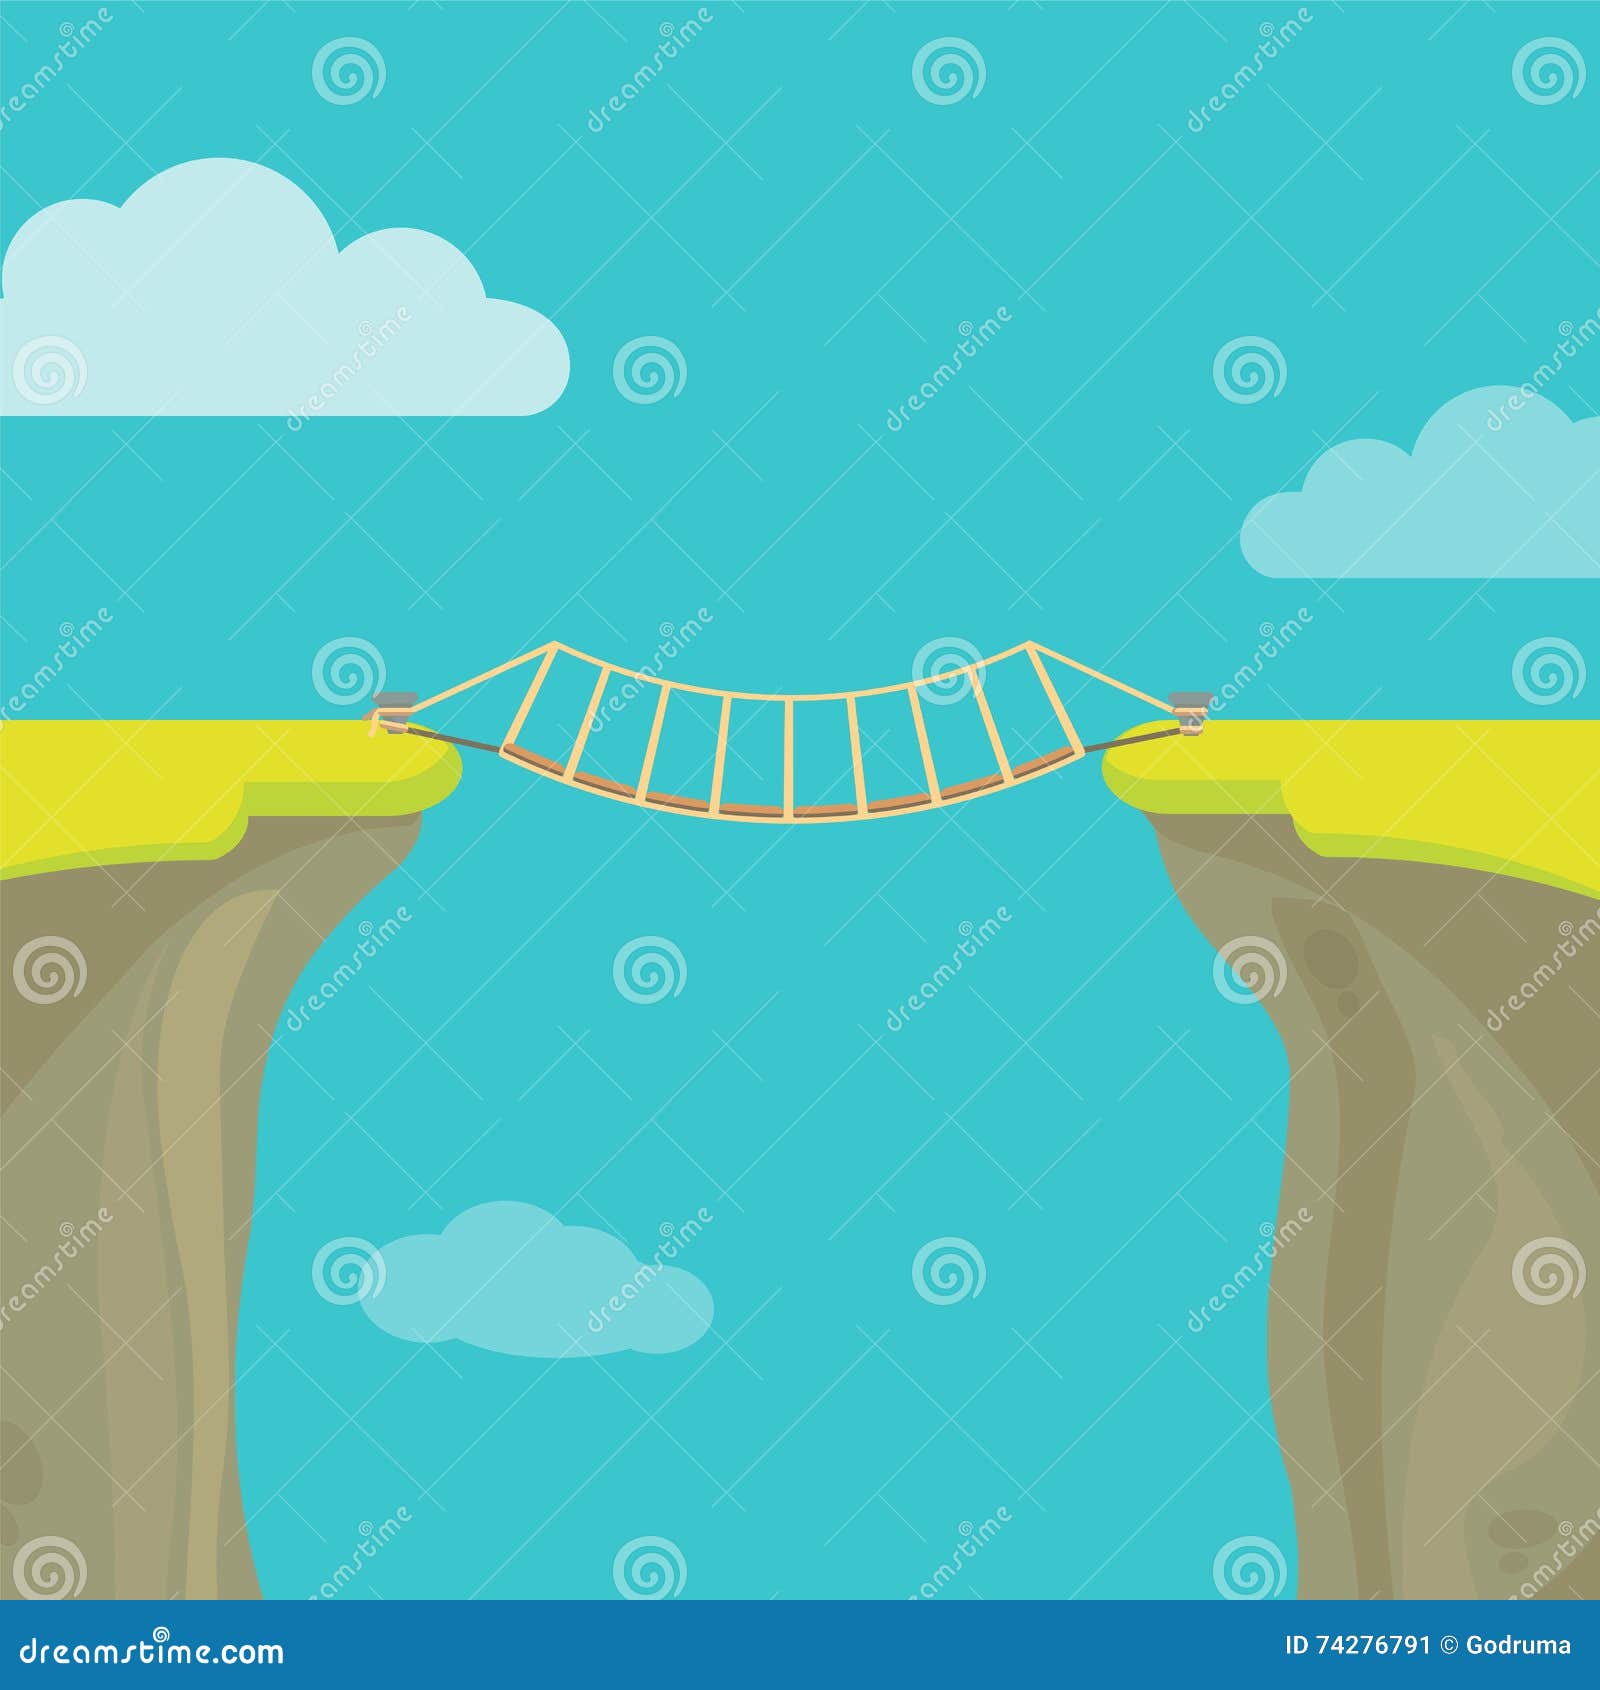 abyss, gap or cliff concept with bridge sky and clouds.